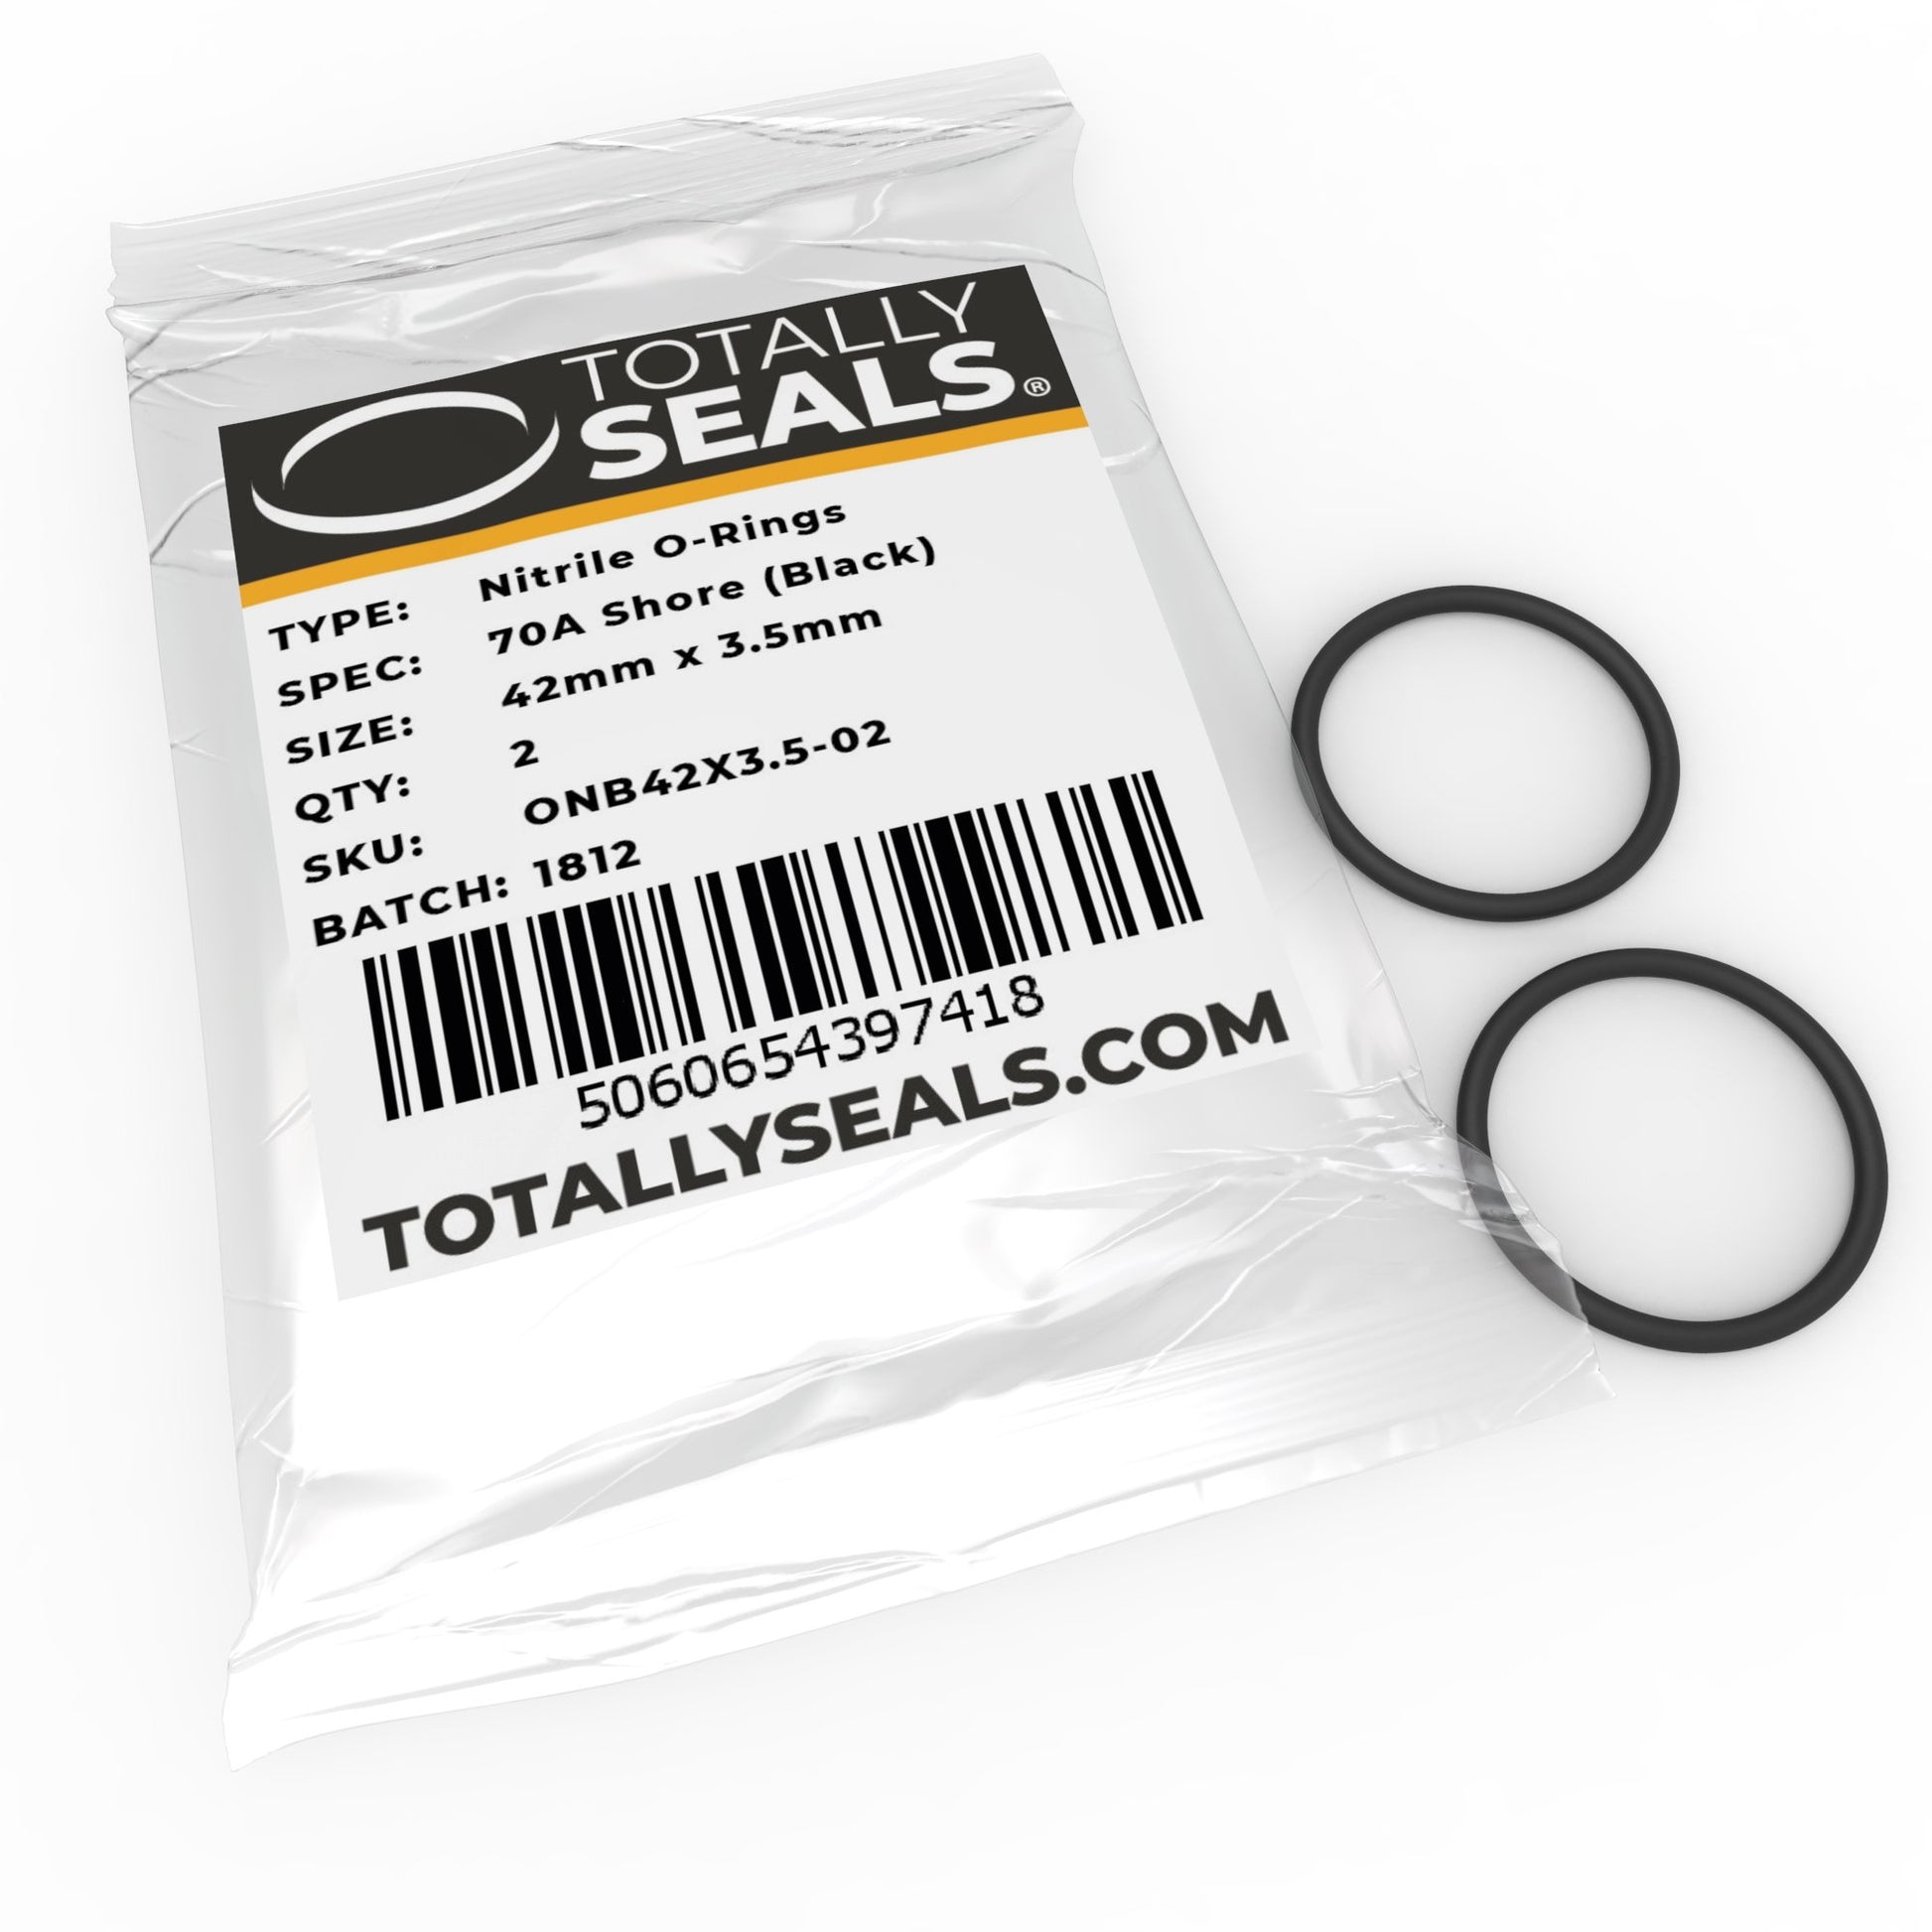 42mm x 3.5mm (49mm OD) Nitrile O-Rings - Totally Seals®